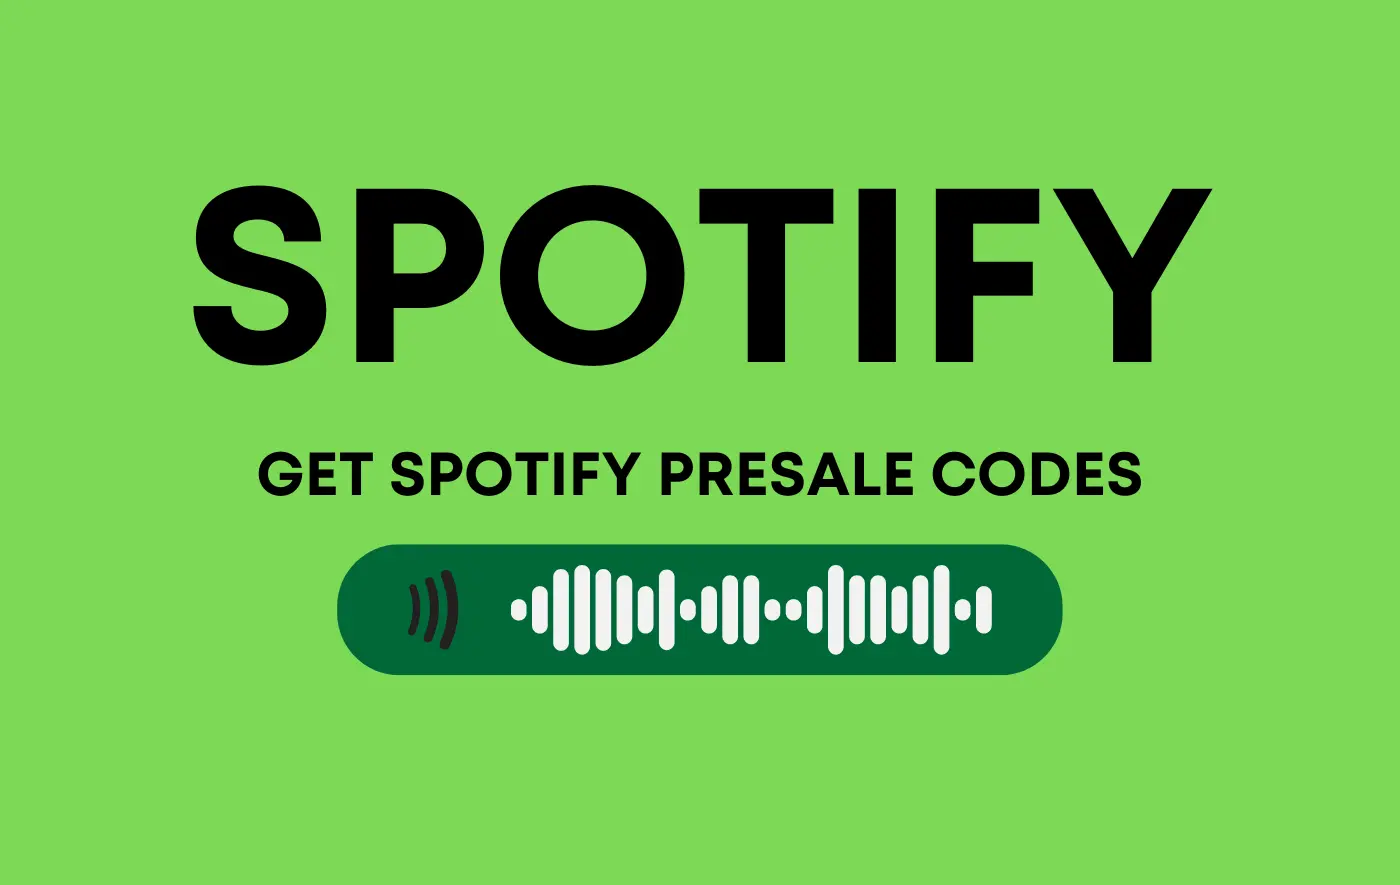 How to Spotify presale codes